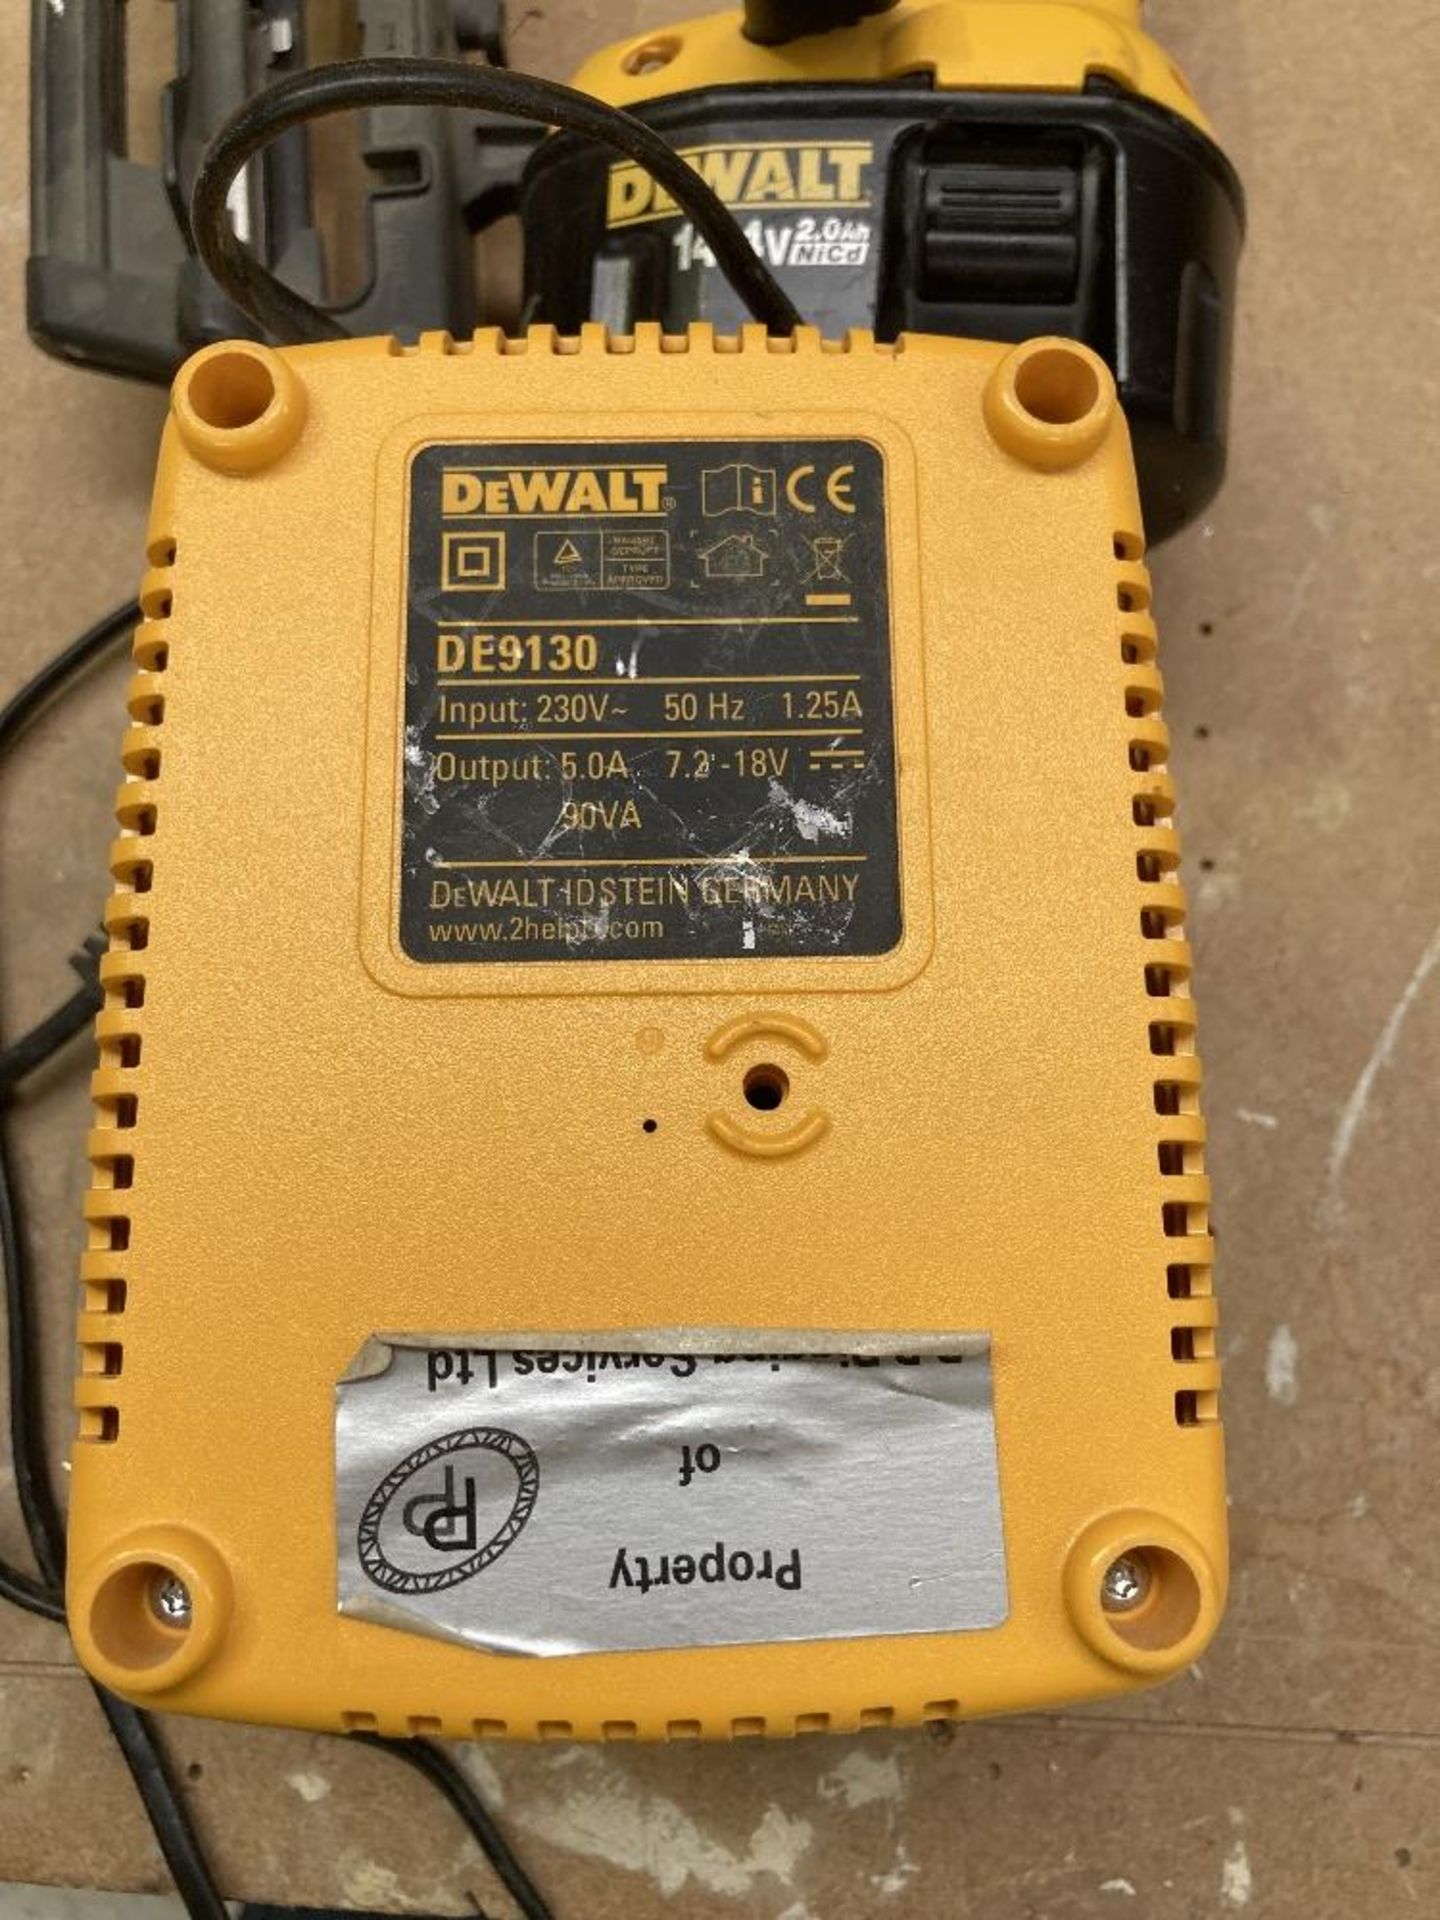 Dewalt DC610 Cordless Nailer, Charger and Spare Battery - Image 4 of 5